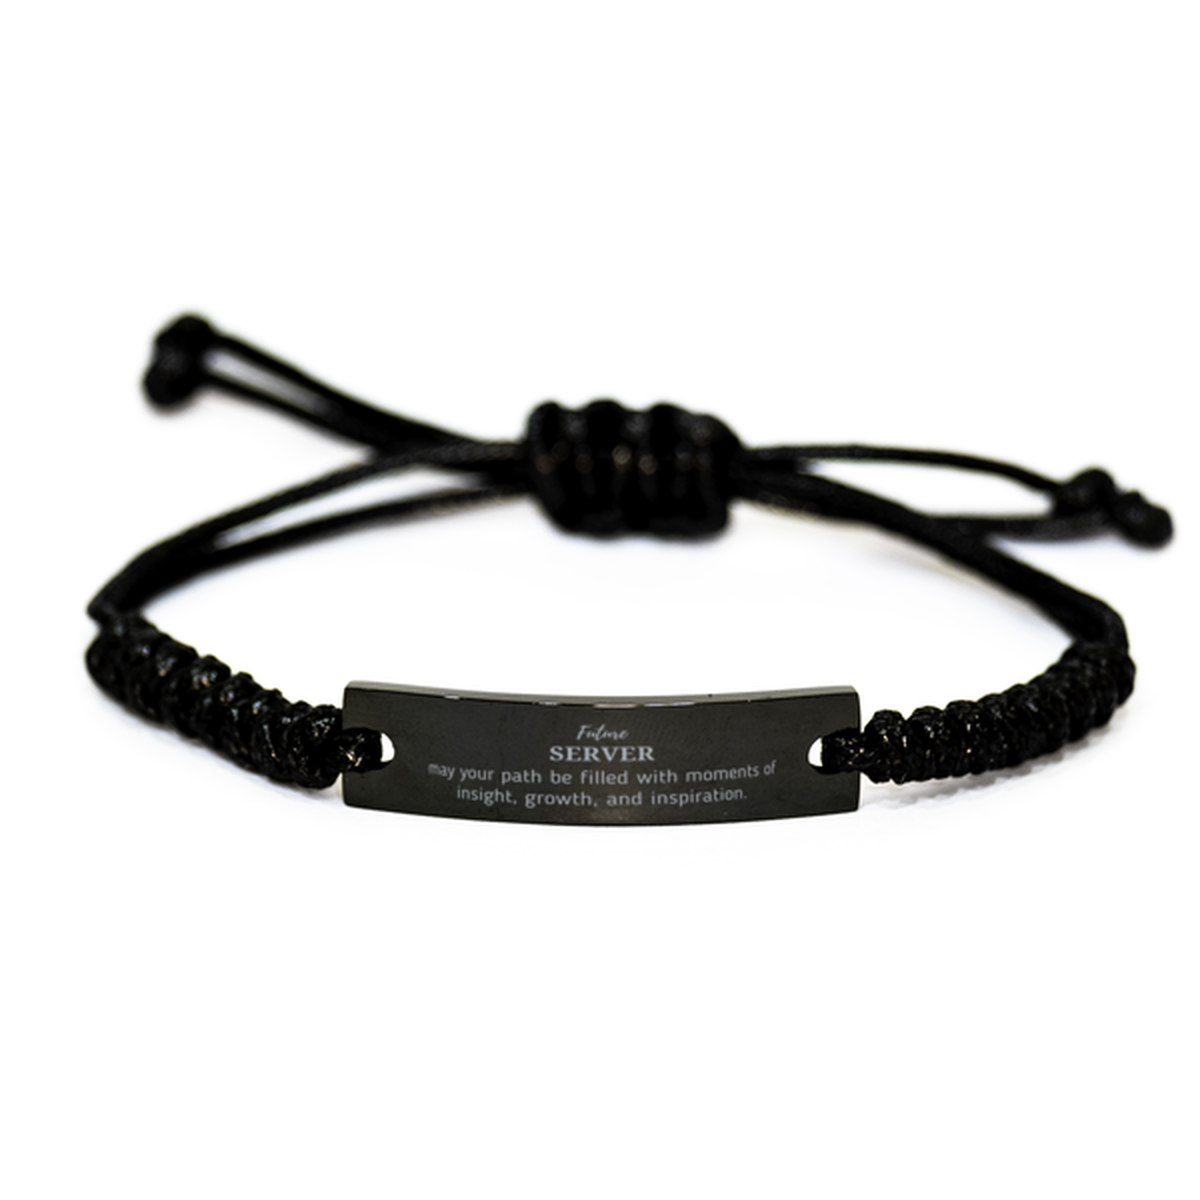 Future Server Gifts, May your path be filled with moments of insight, Graduation Gifts for New Server, Christmas Unique Black Rope Bracelet For Men, Women, Friends